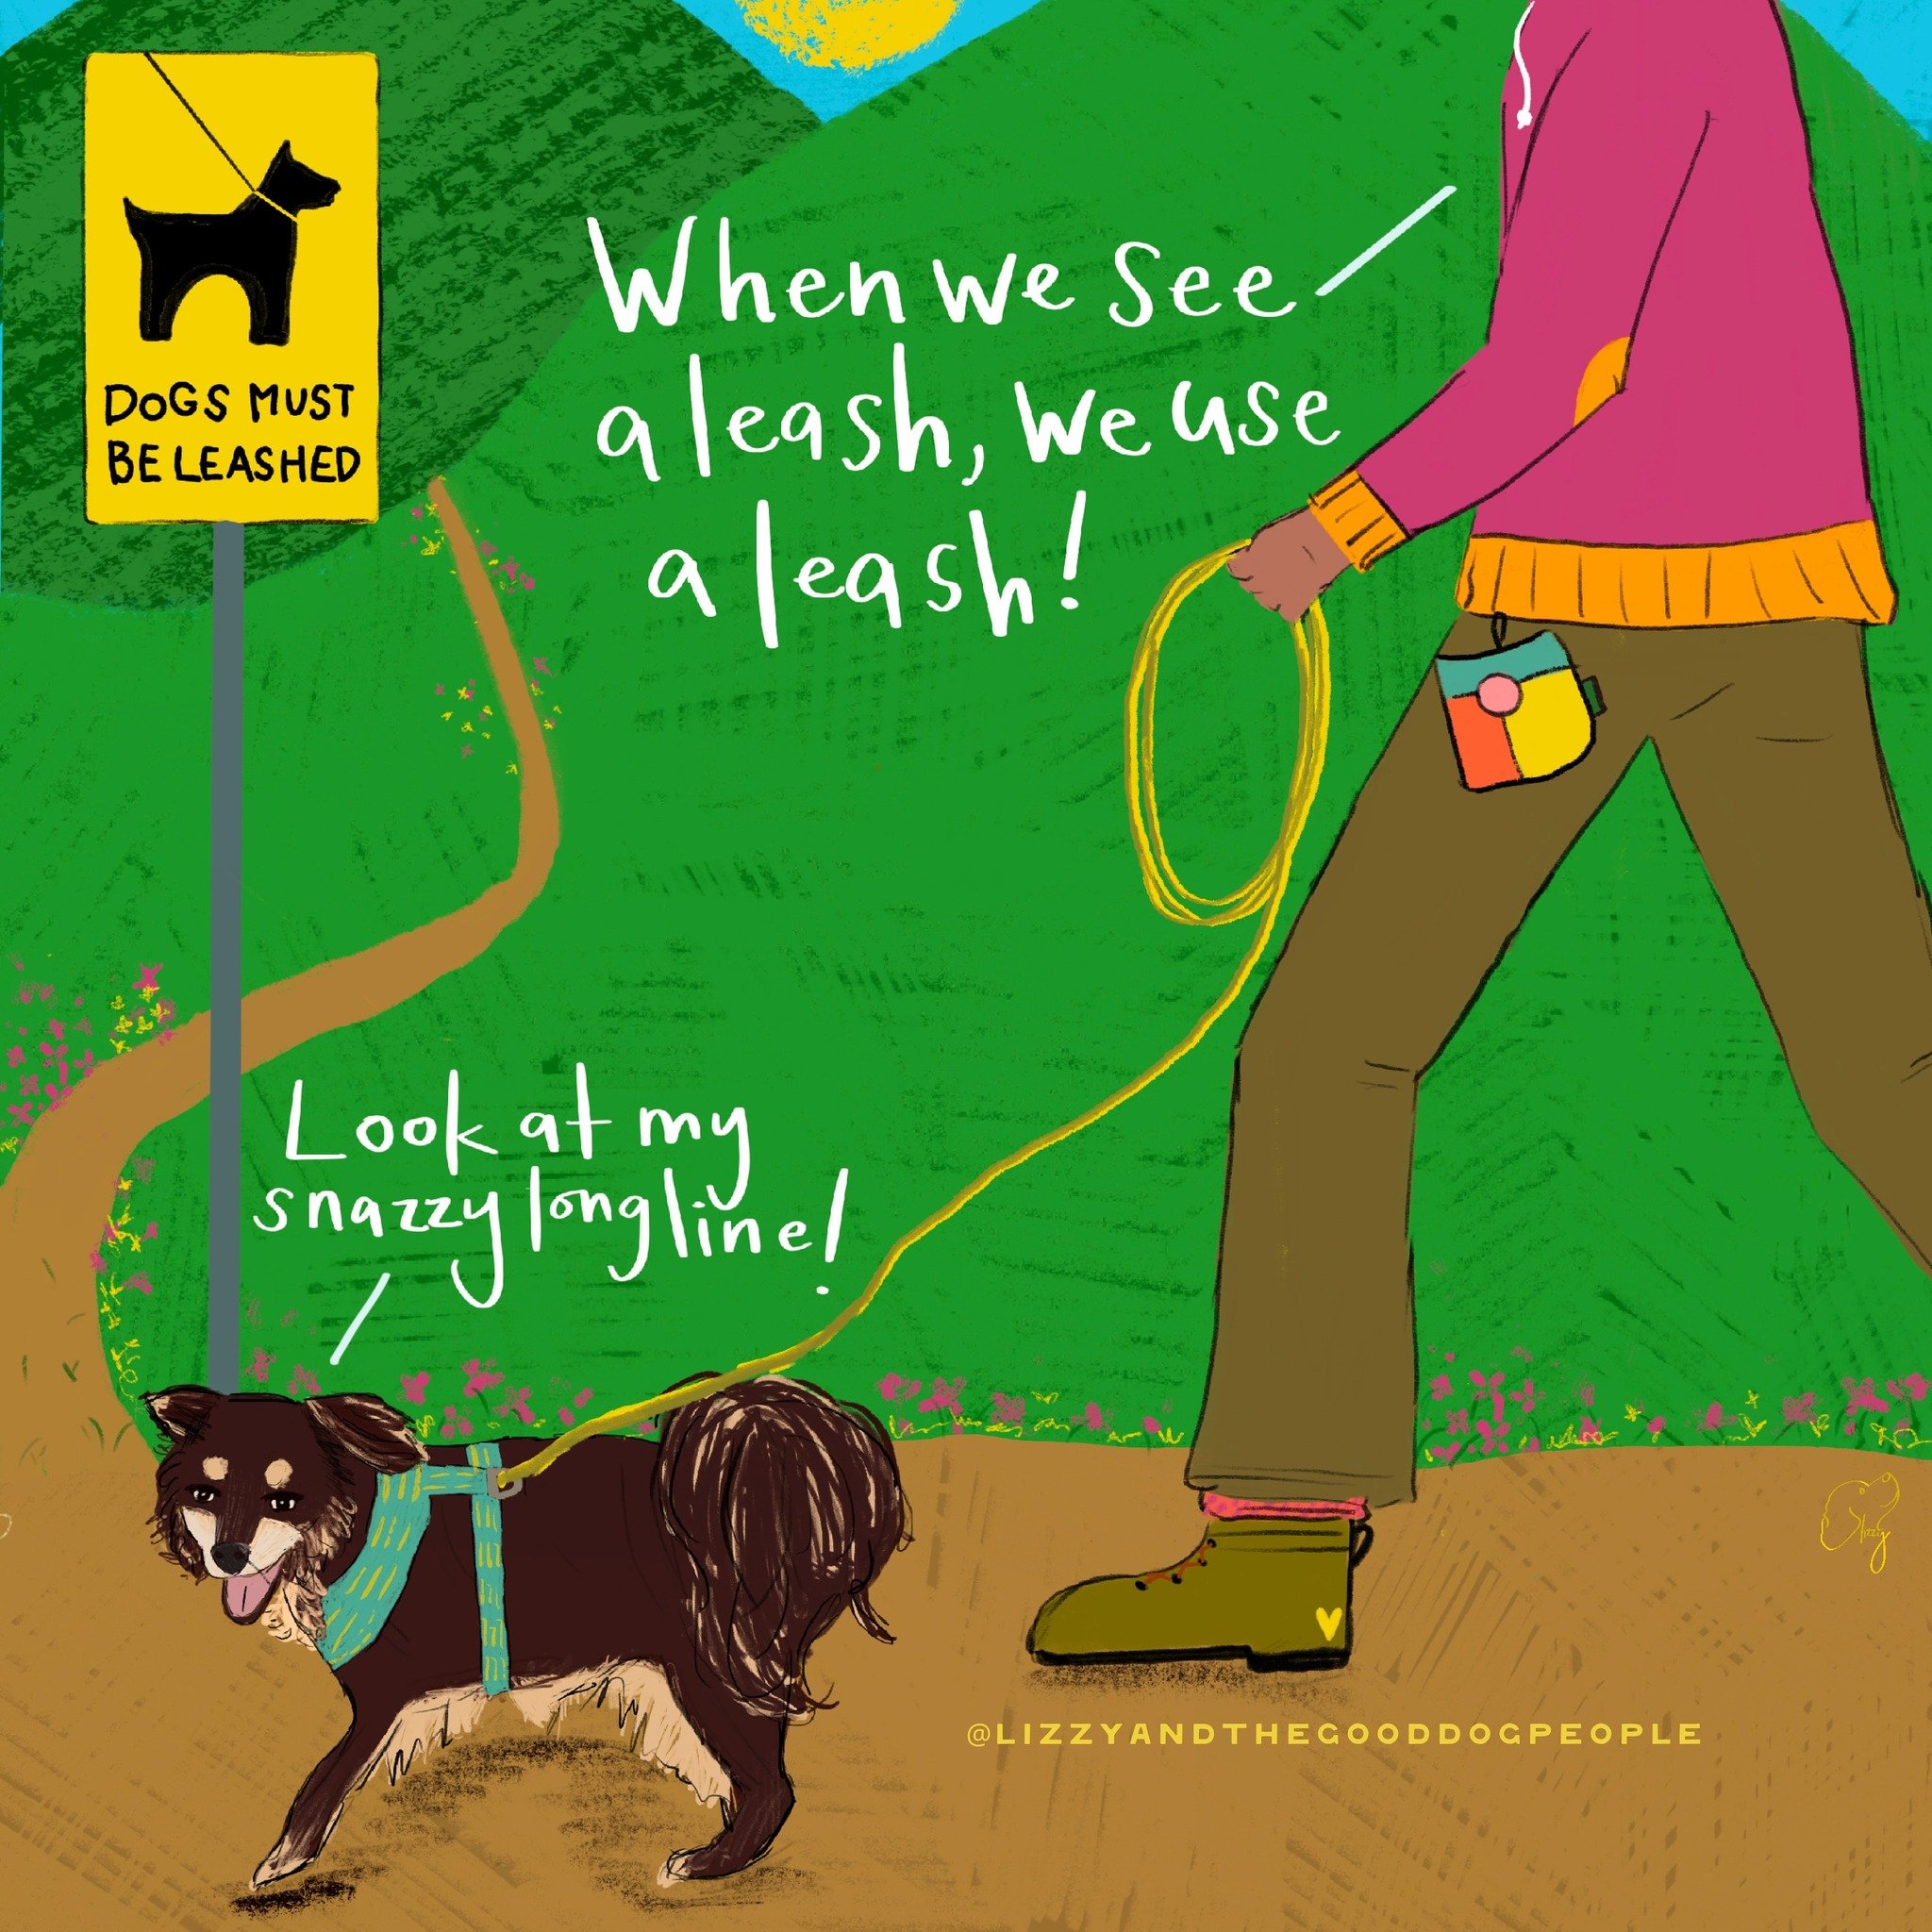 Spring is here! More people are out enjoying the good weather with their dogs. Honoring leash laws and using leashes in public places is one way to be a thoughtful community member.

Safety:&nbsp;Leashes prevent our dogs from running into traffic, ch